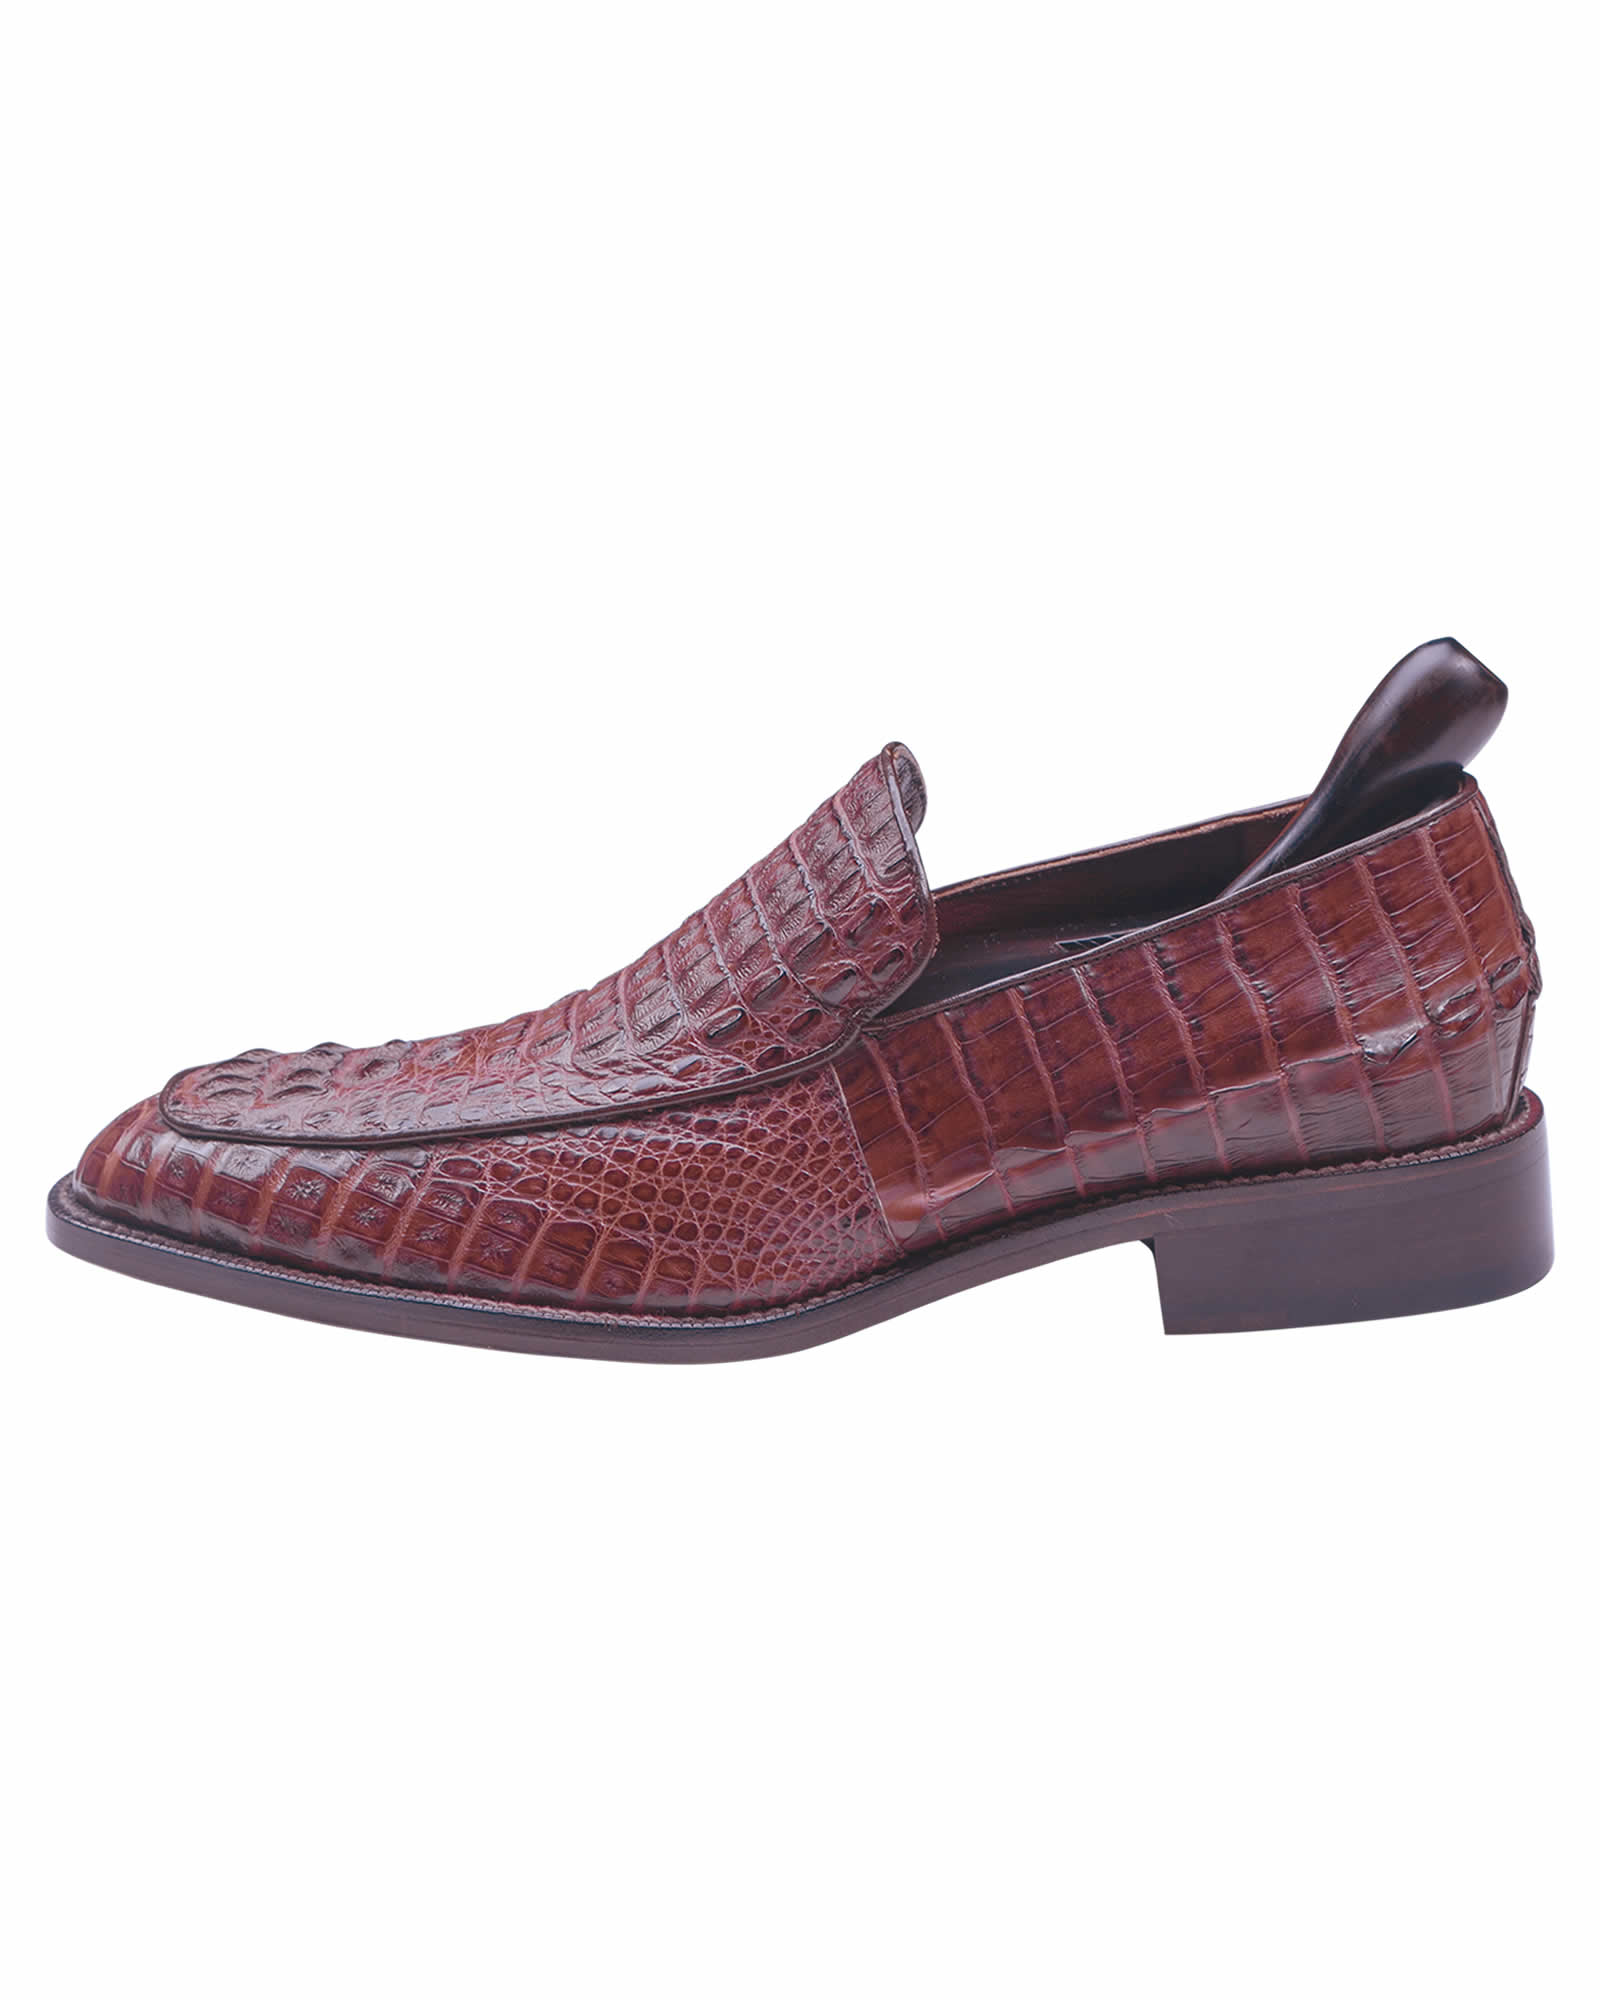 Custom Made Italian Crocodile Loafer Shoes On Sale in Vancouver